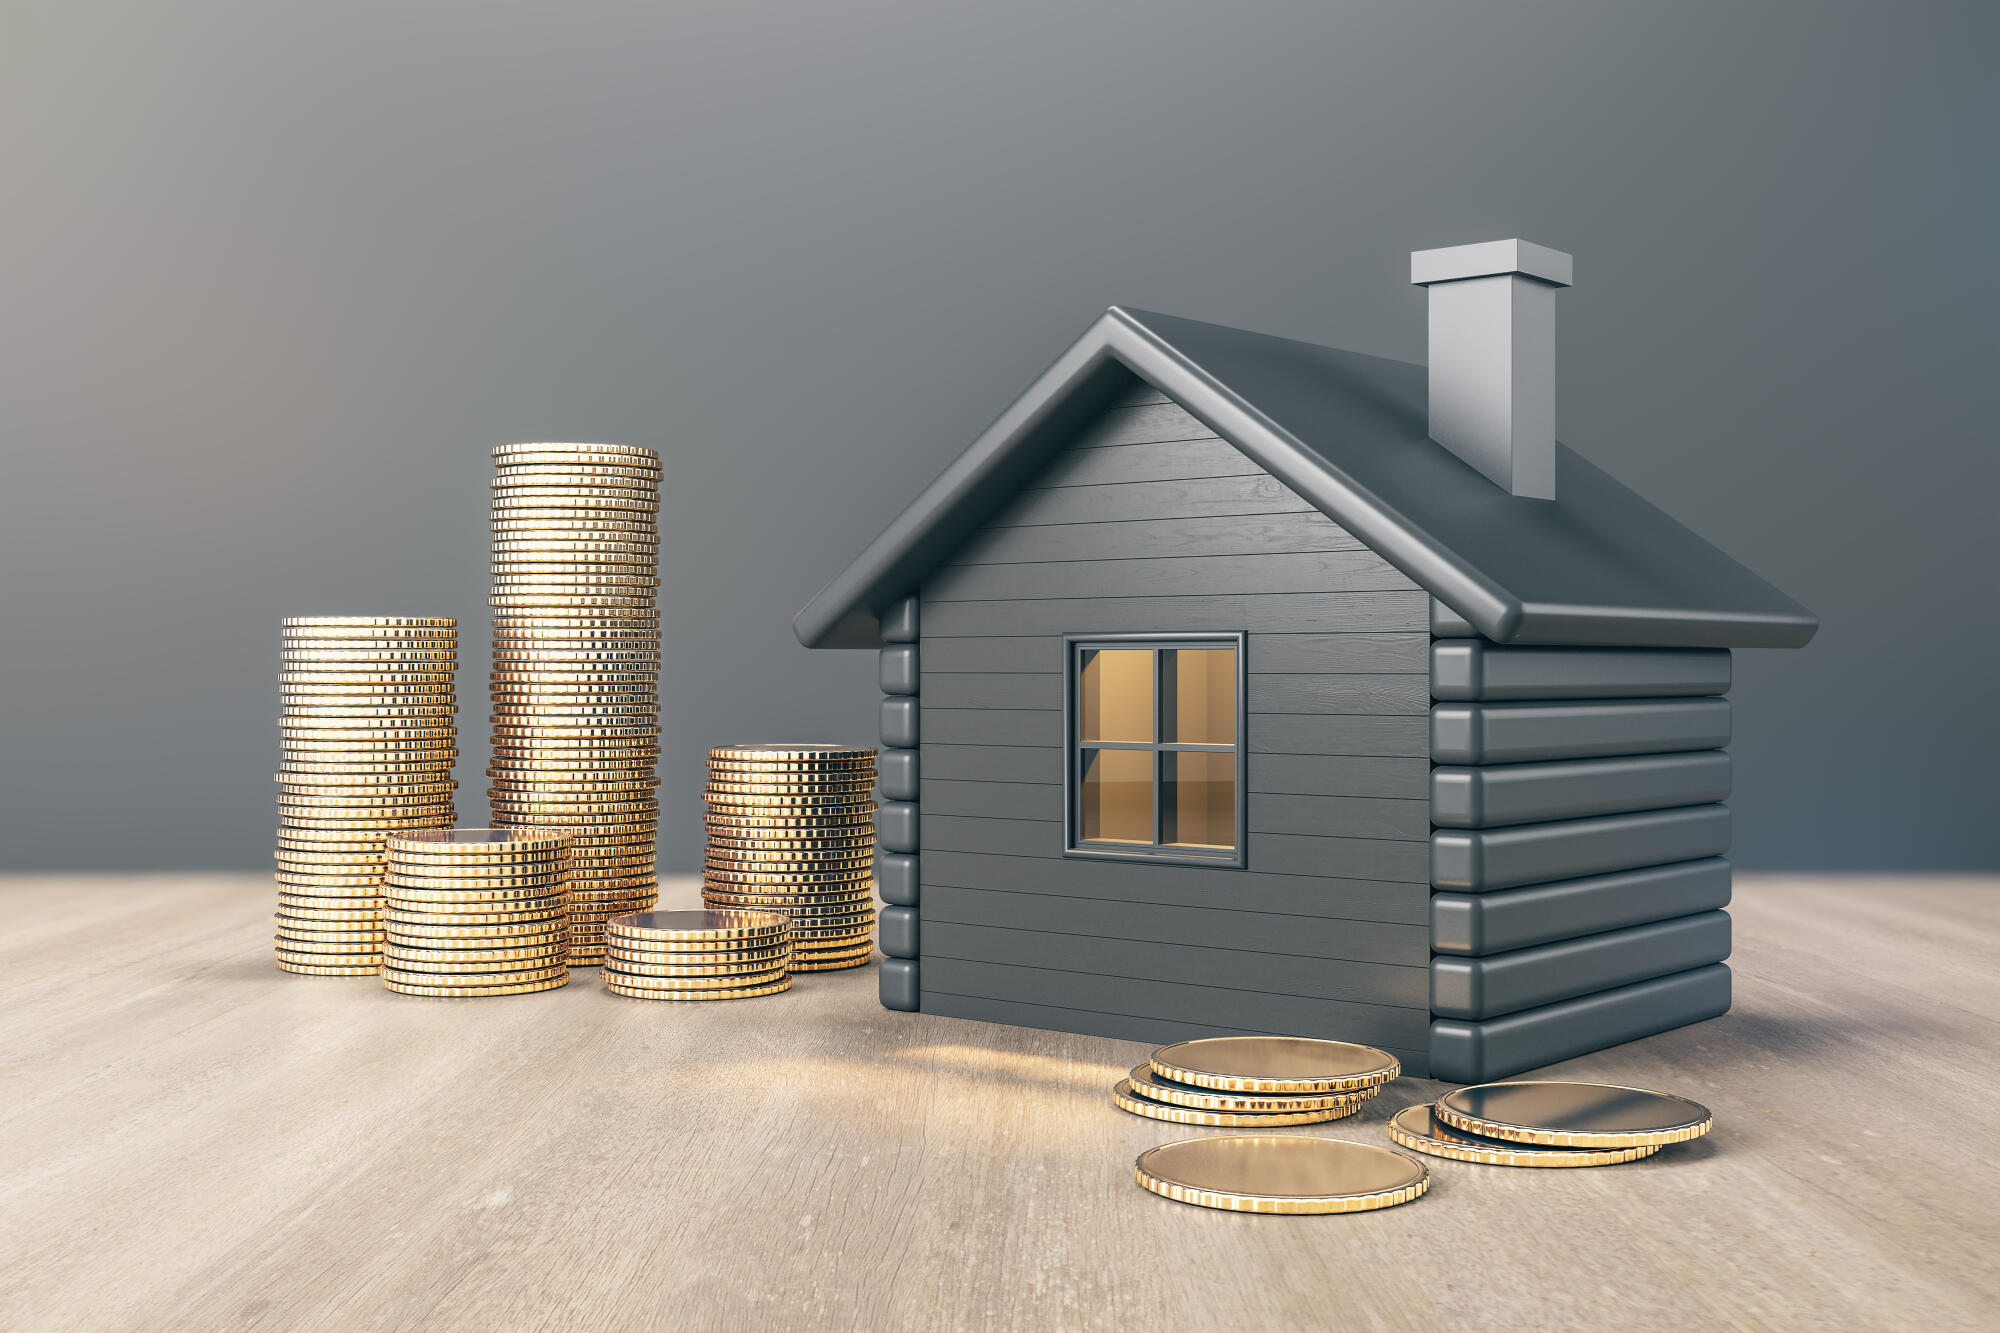 We Buy Houses for Cash: Top Reasons It’s a Good Idea